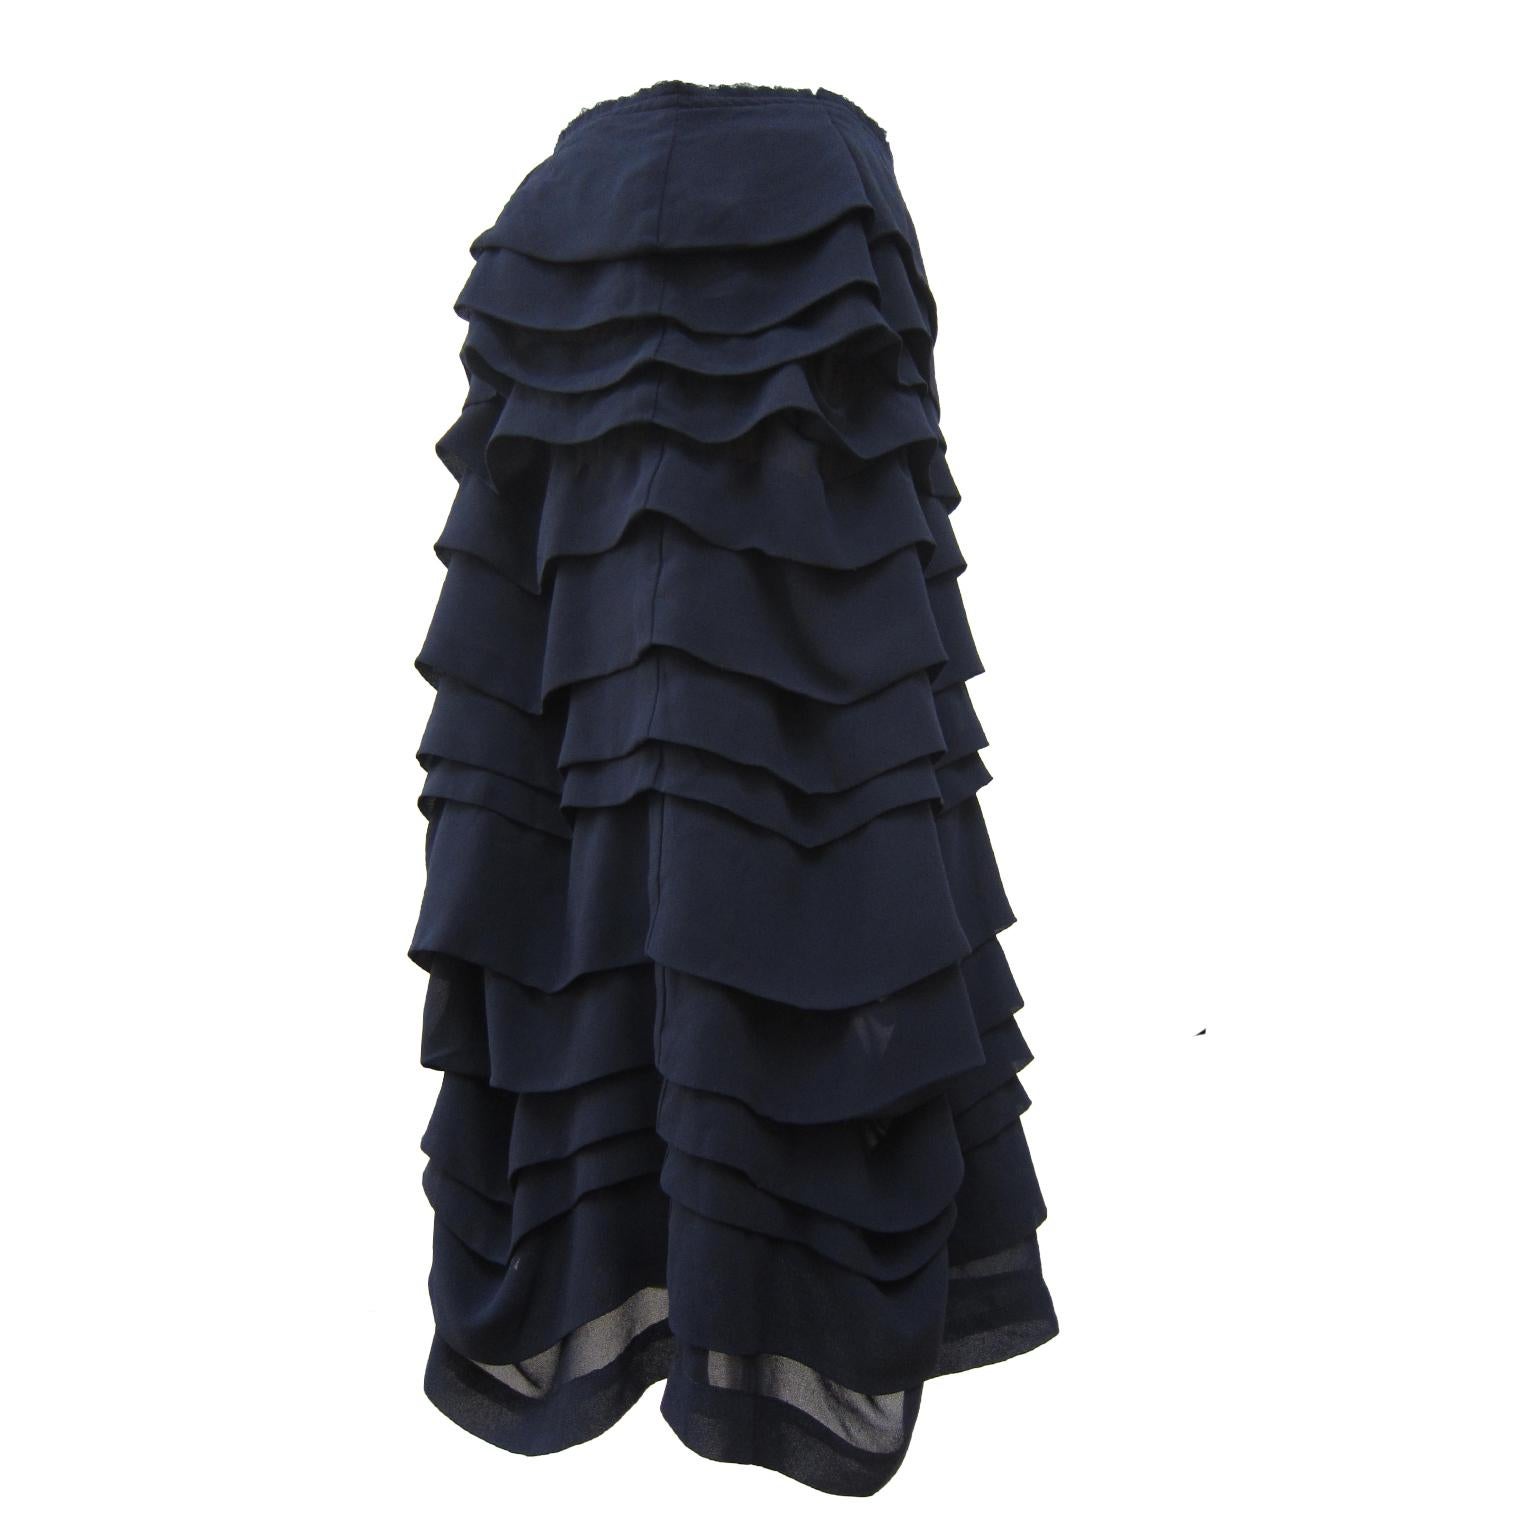 Comme Des Garçons ruffle layered beautifully volumed skirt from AD 2004. Featuring layers of folded ruffles stitching throughout with unfinished waist line. 
Size : M
Waist : 37 cm
Length : 66 cm

